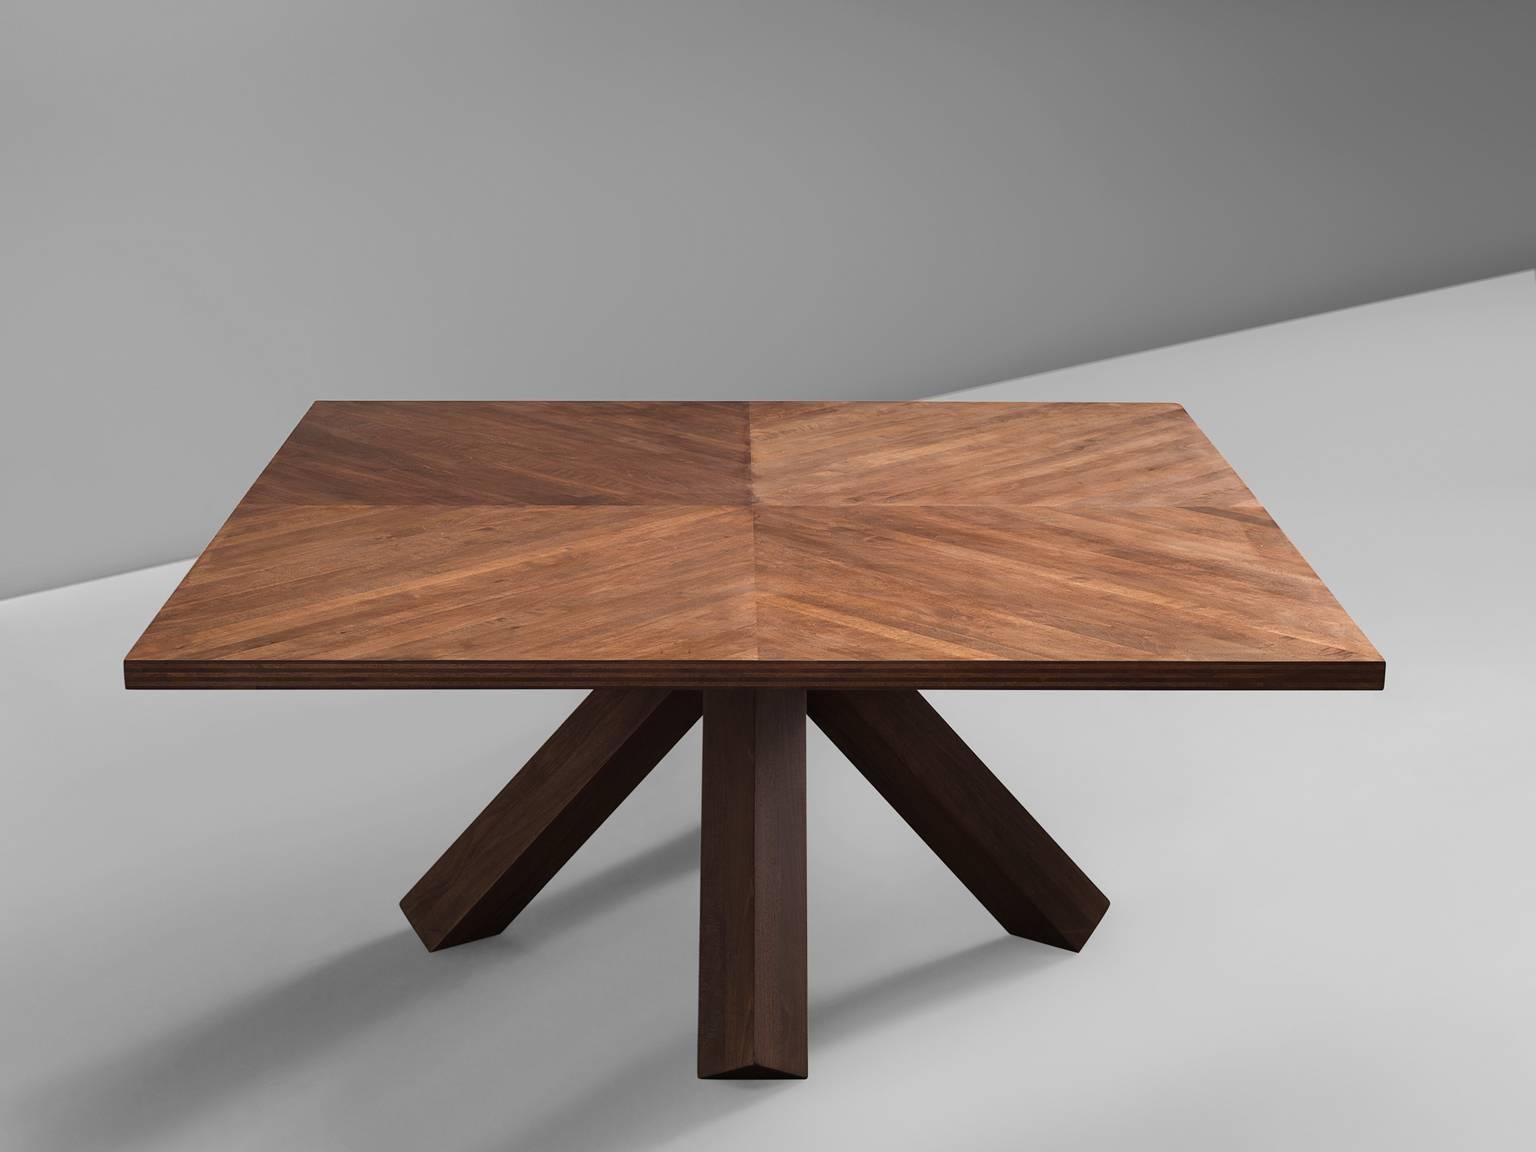 Dining table, wood, Mario Bellini for Cassina, Italy, 1976.

This solemn, architectural coffee table features a hefty, sturdy tripod base and a table that consists of four square elements with several planks. This table is designed by Bellini as